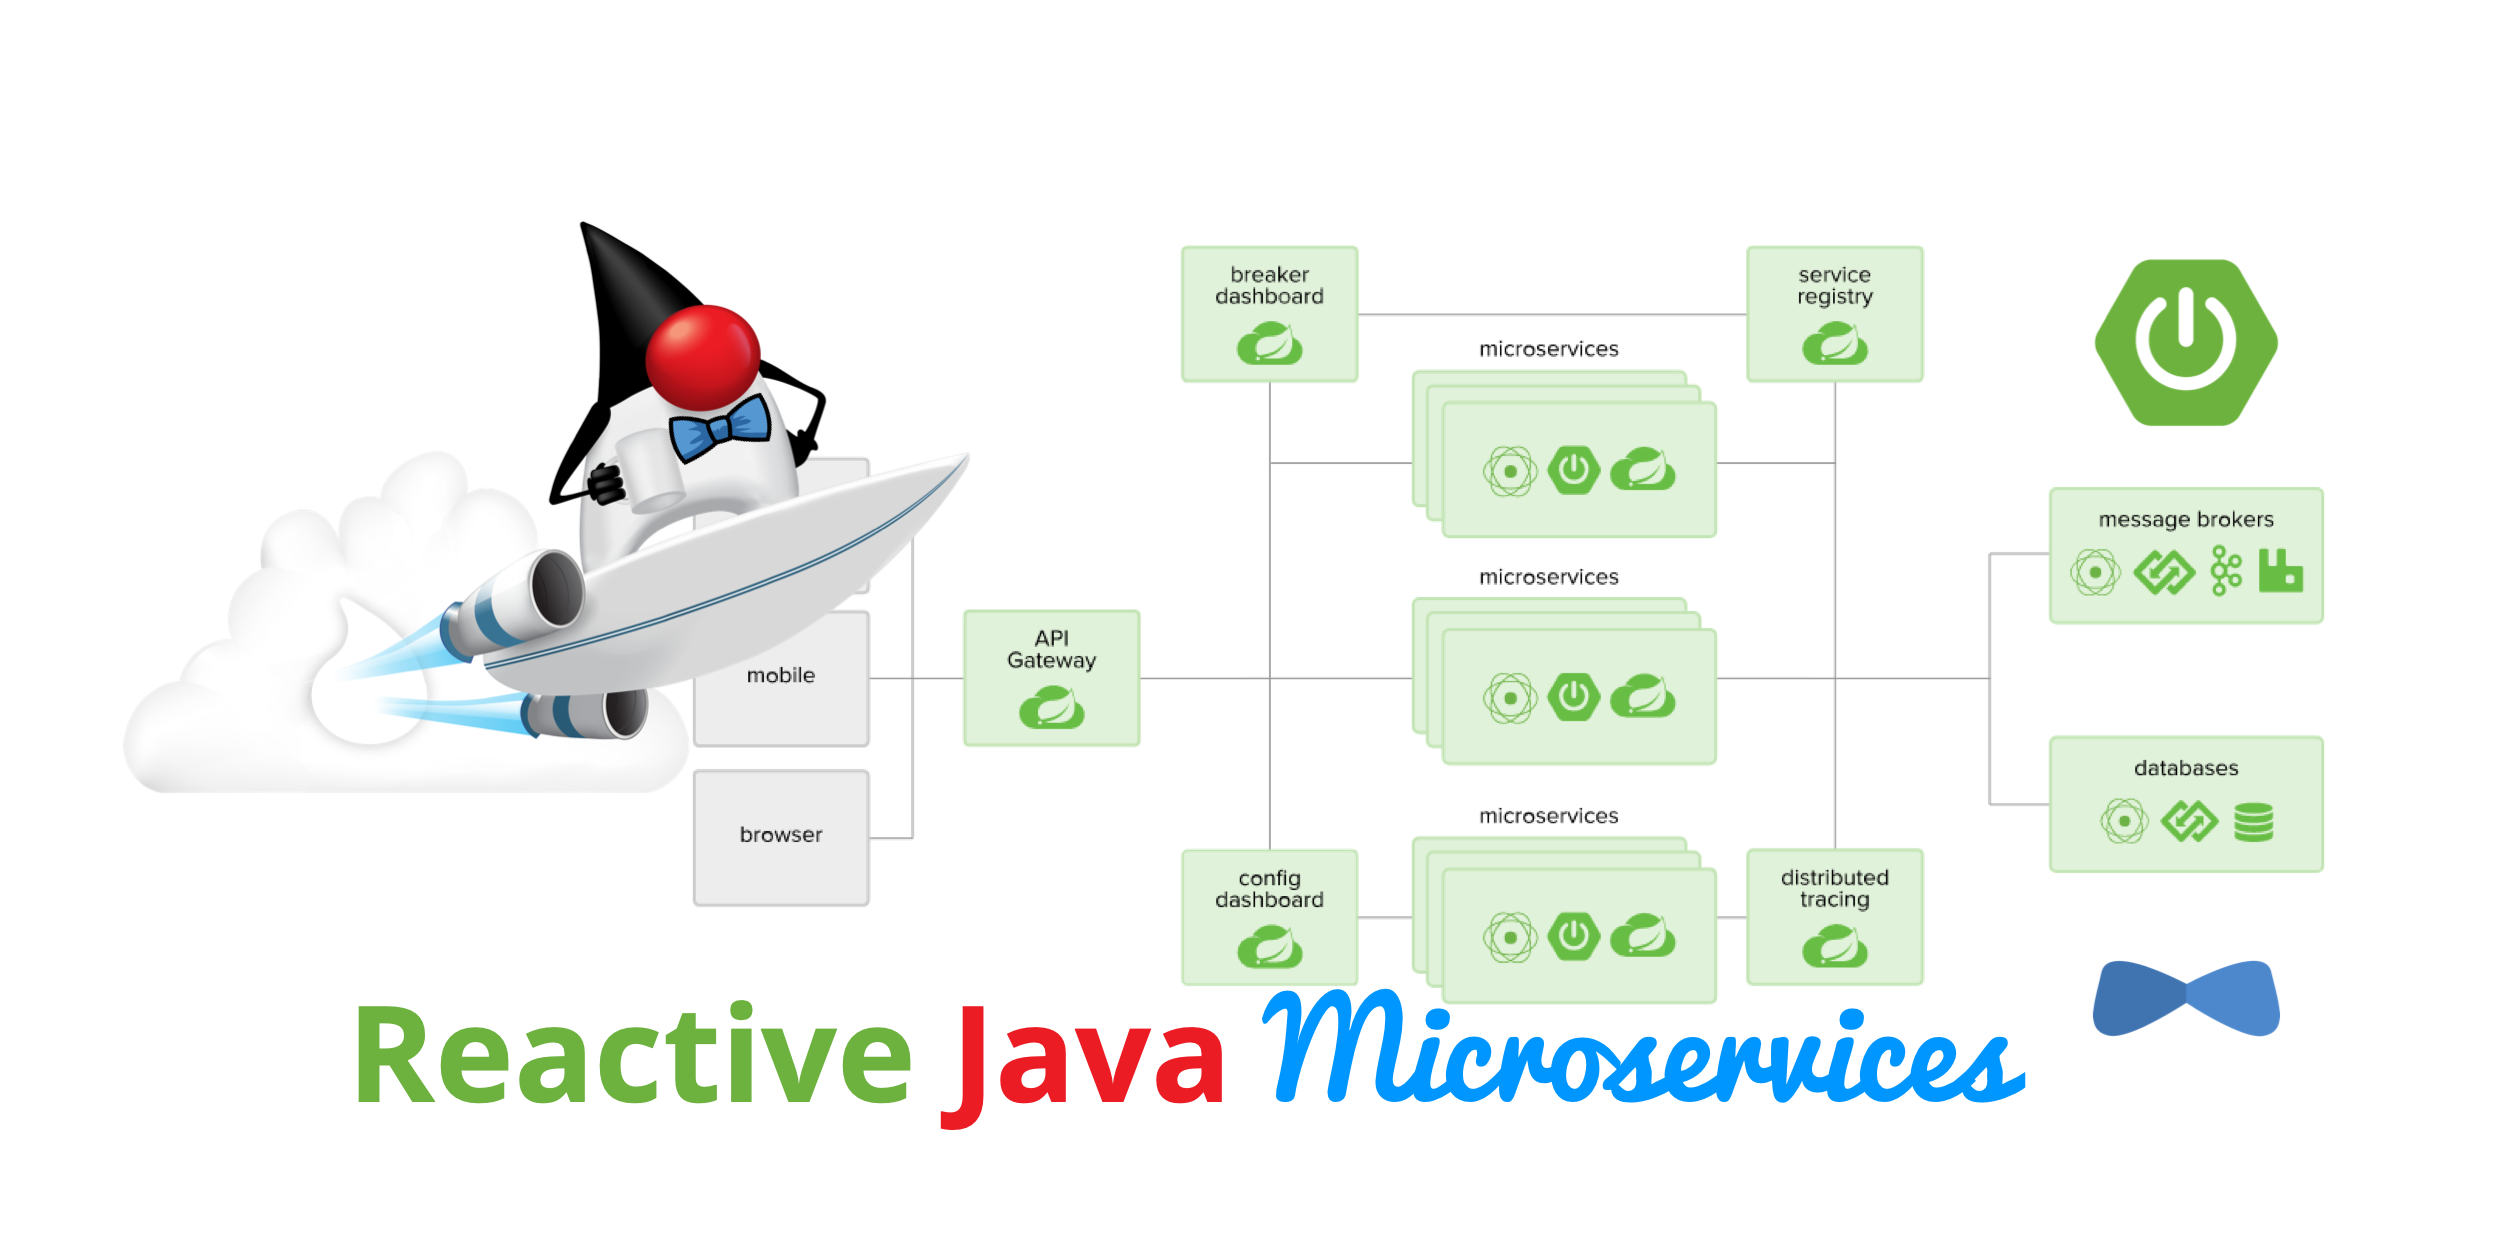 Reactive Java Microservices